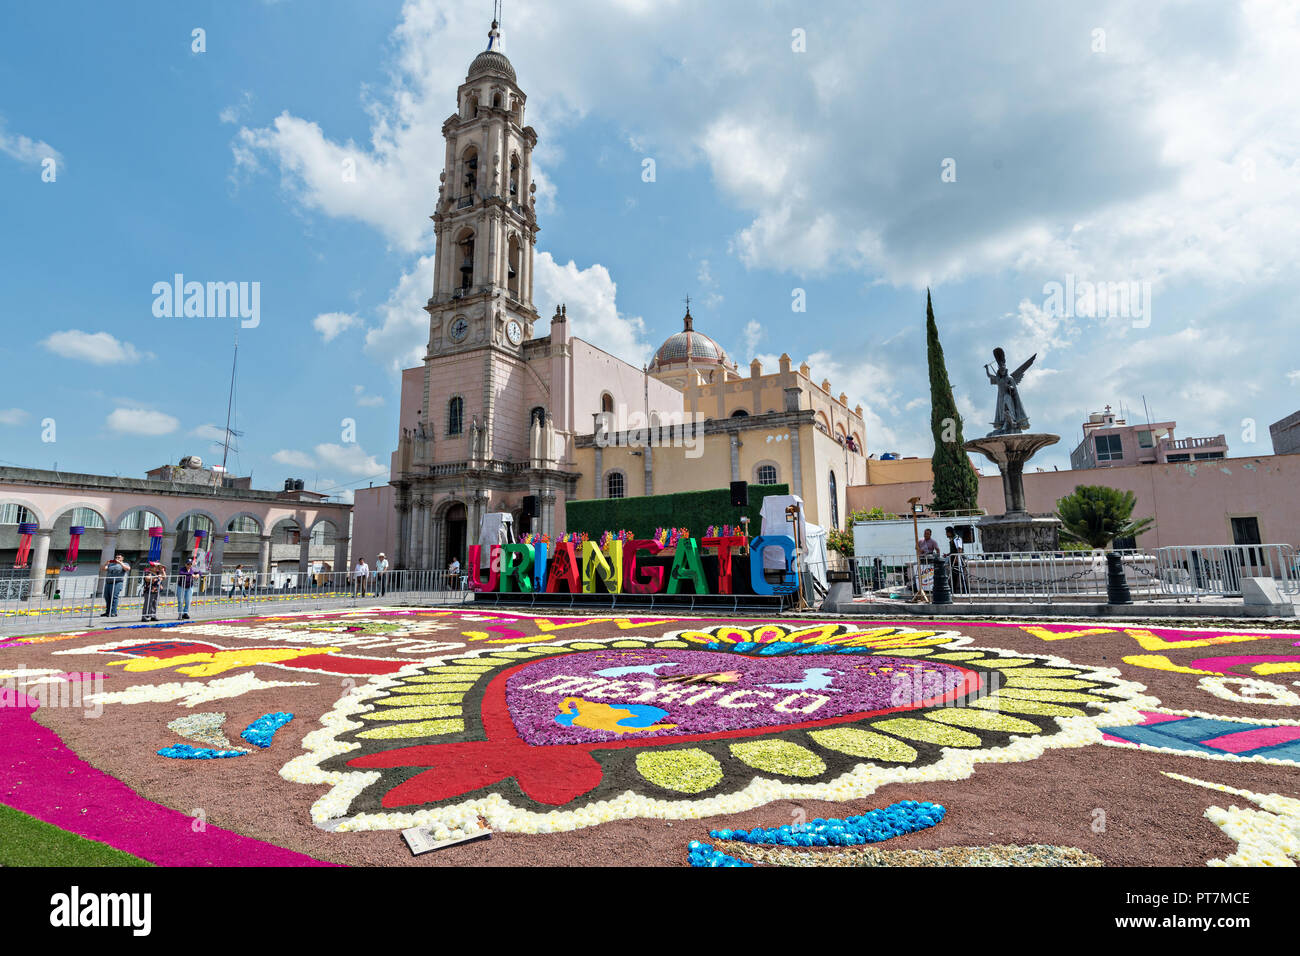 a-giant-football-field-size-floral-carpet-decorates-the-town-square-in-front-of-the-parroquia-san-miguel-archangel-church-in-the-central-mexican-town-of-uriangato-guanajuato-every-year-residents-create-giant-floral-carpets-made-from-colored-sawdust-and-decorated-with-flowers-during-the-8th-night-celebration-marking-the-end-of-the-feast-of-st-michael-uriangato-became-an-international-sensation-after-wowing-brussels-with-their-floral-carpet-displayed-at-the-brussels-grand-place-during-the-belgium-floral-carpet-festival-PT7MCE.jpg